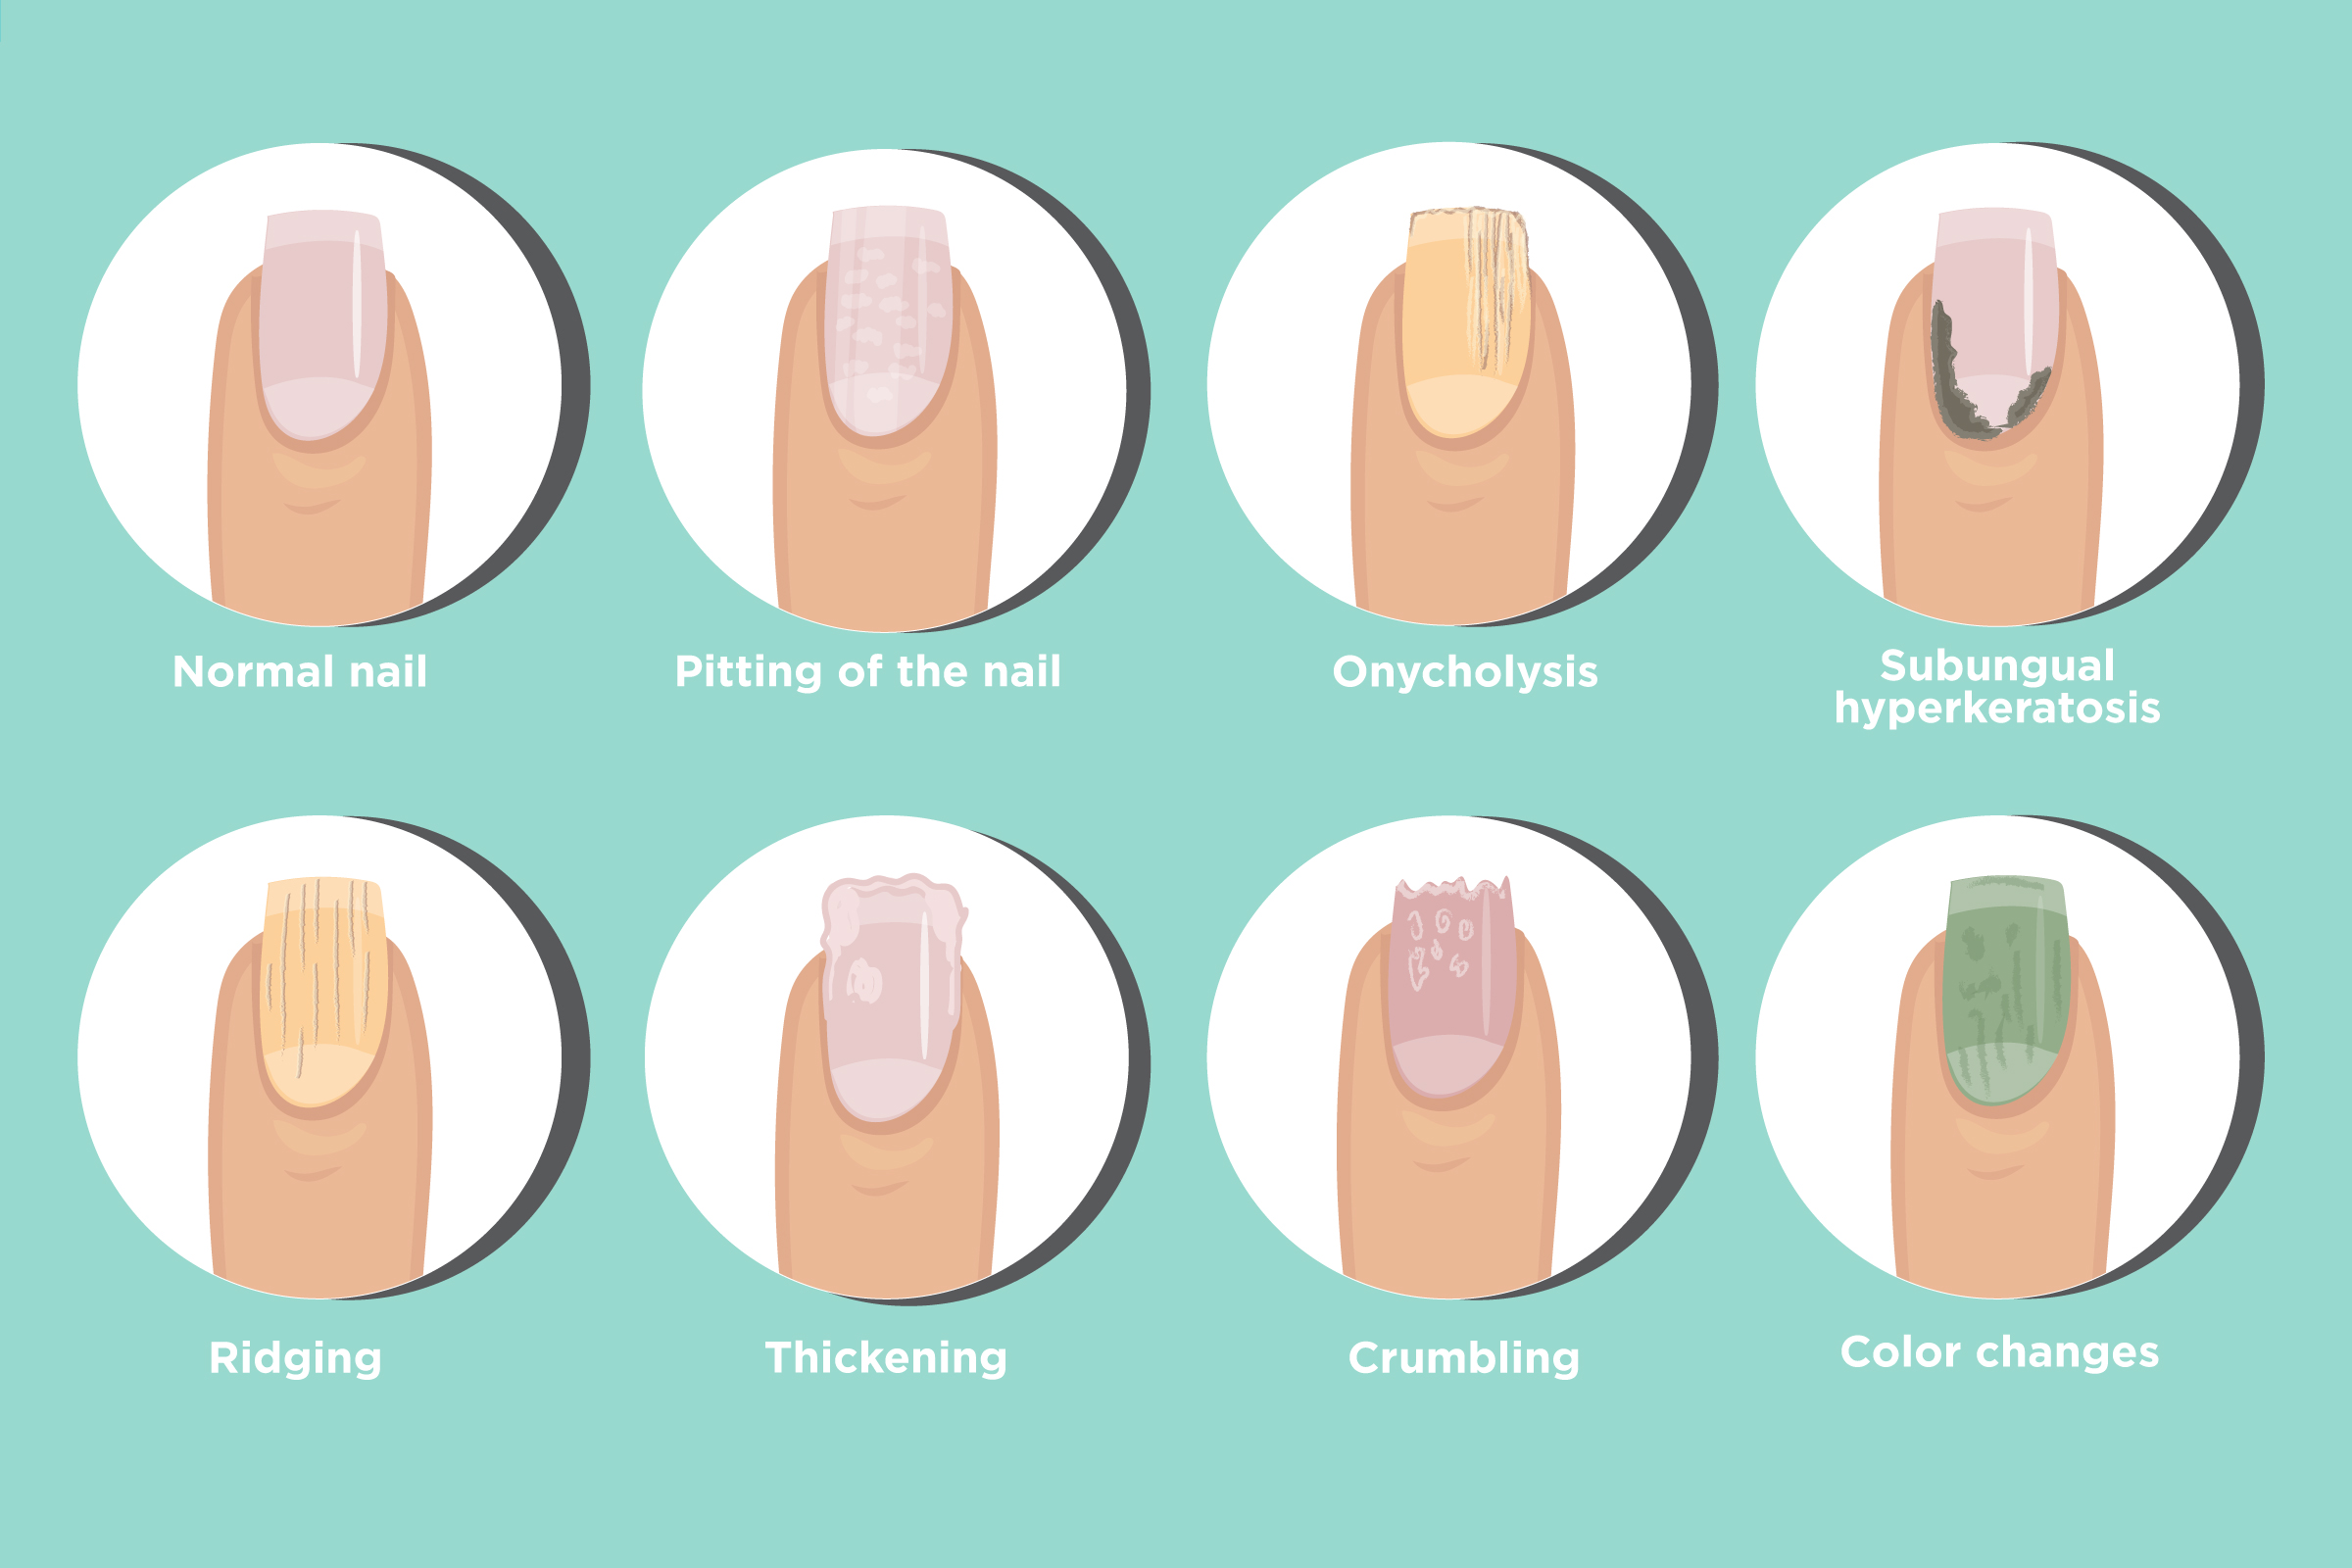 3. How to Tell if Your Nail Color is a Sign of Health Problems - wide 9